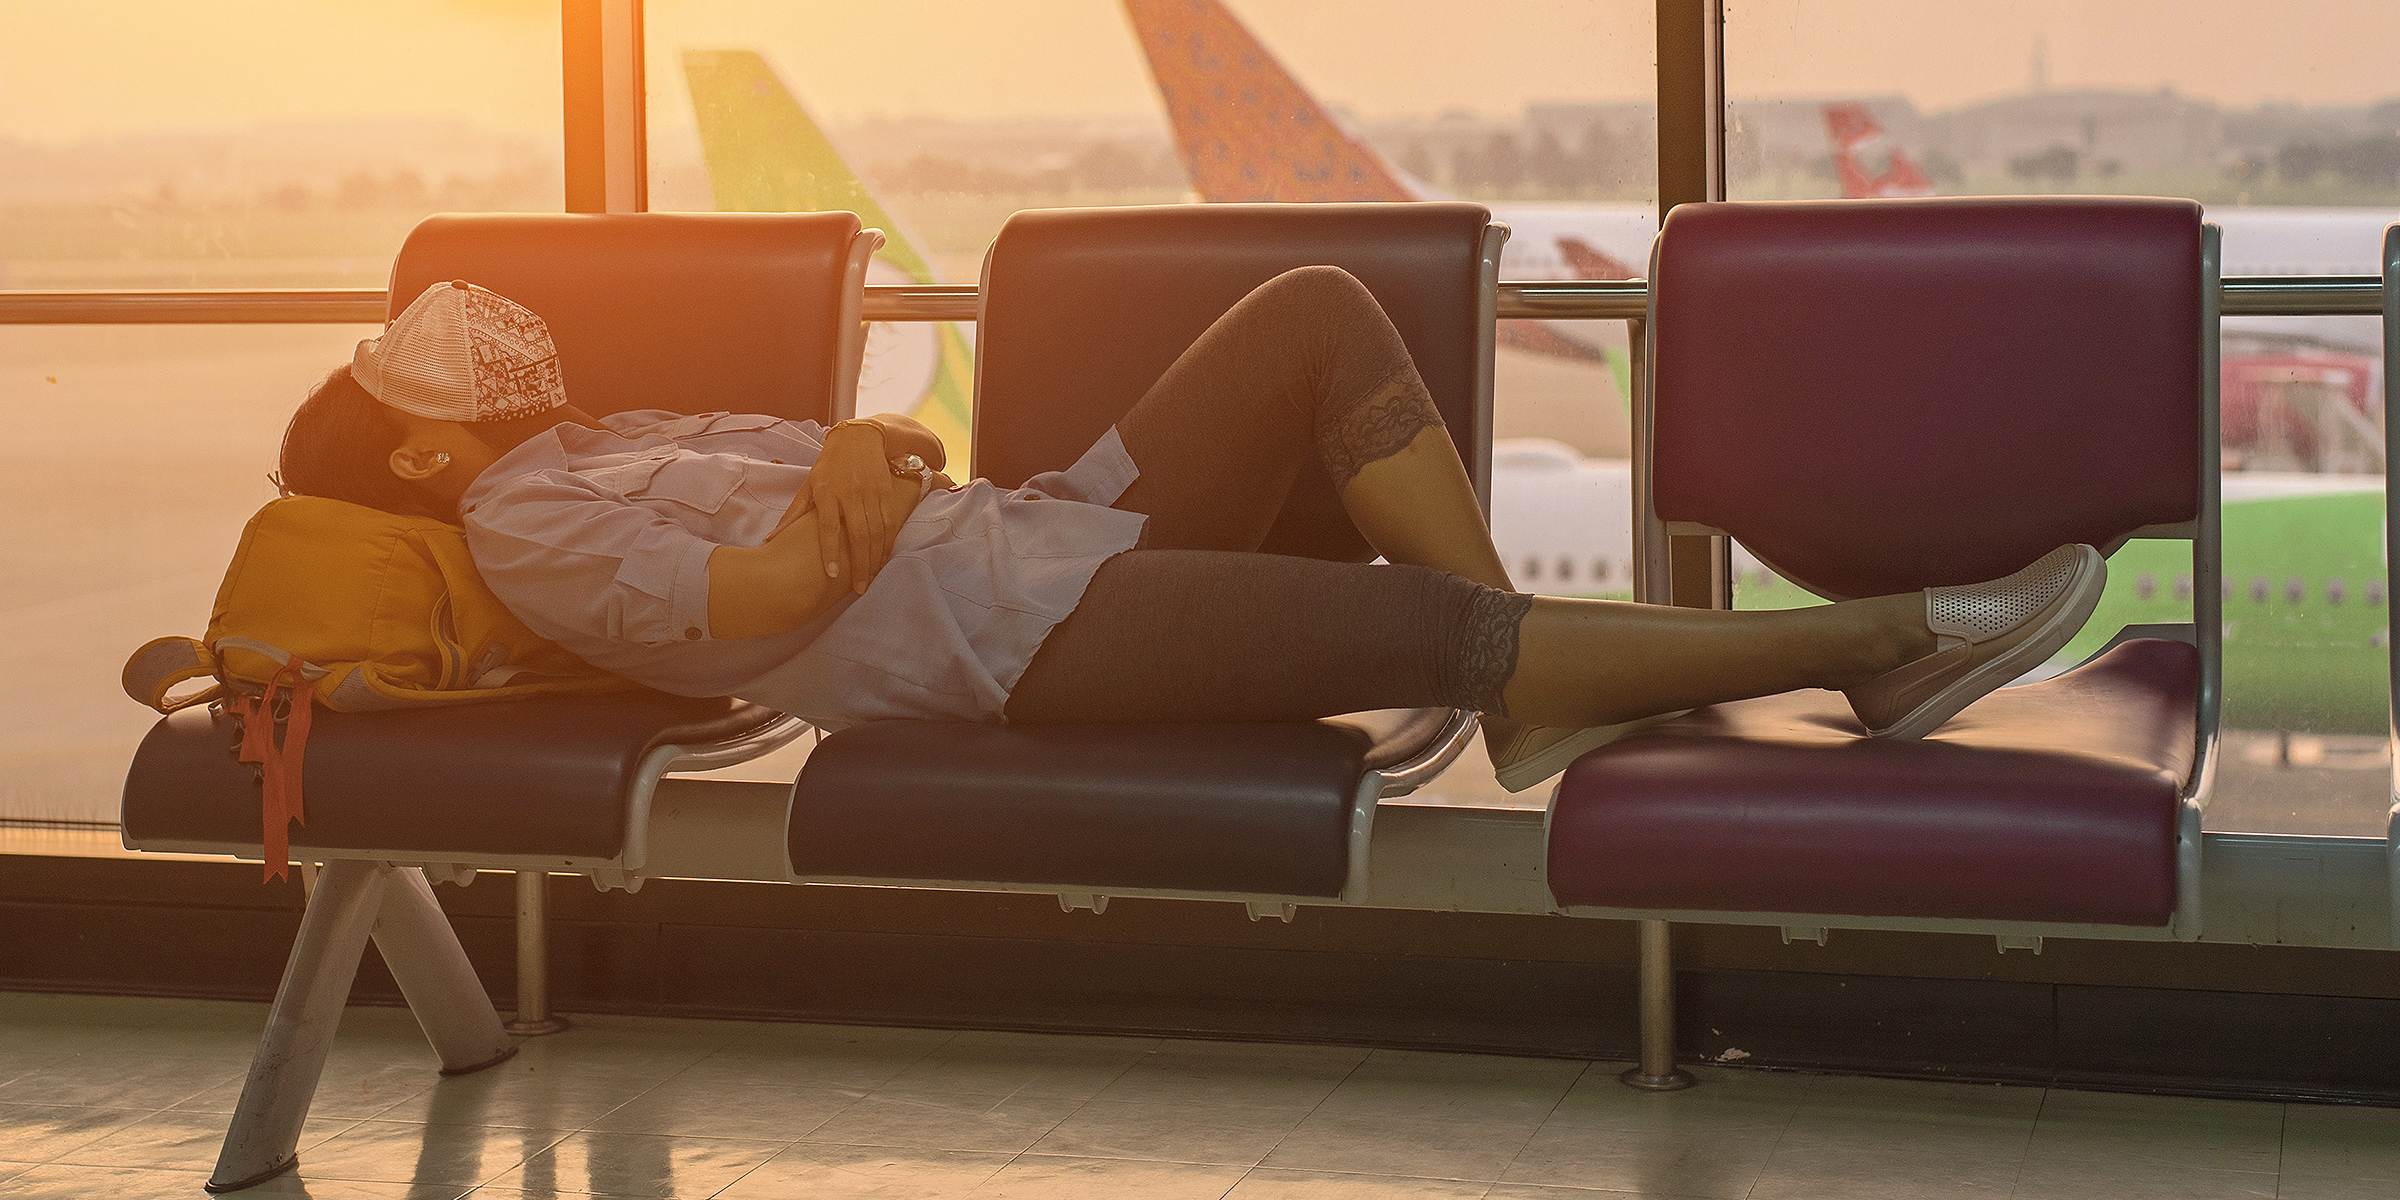 A person sleeping in an airport | Source: Shutterstock